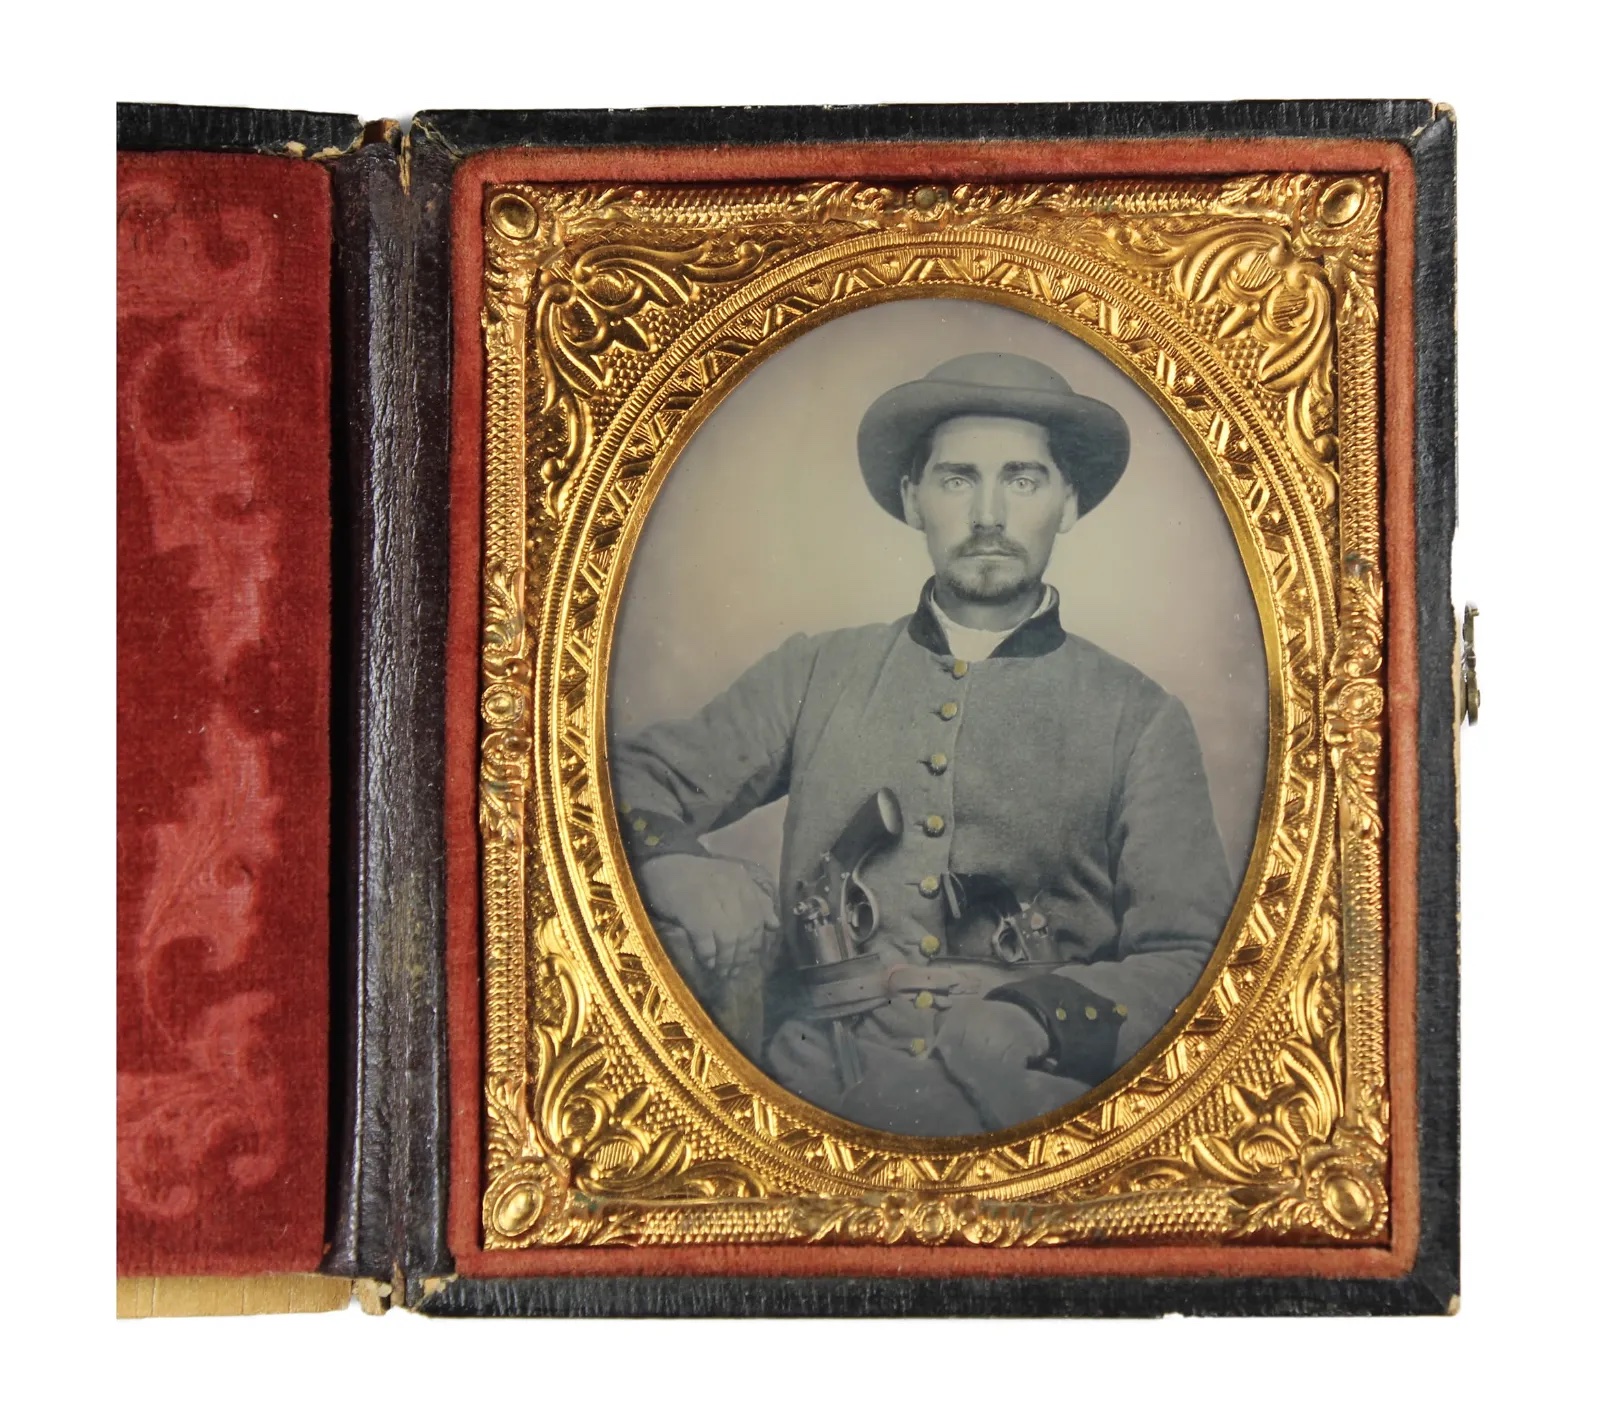 Ambrotype of a Confederate soldier with two large pistols tucked into his belt, one a rarely seen M1858 Starr revolver, which sold for $9,250 ($11,377 with buyer's premium) at Fleischer's.
